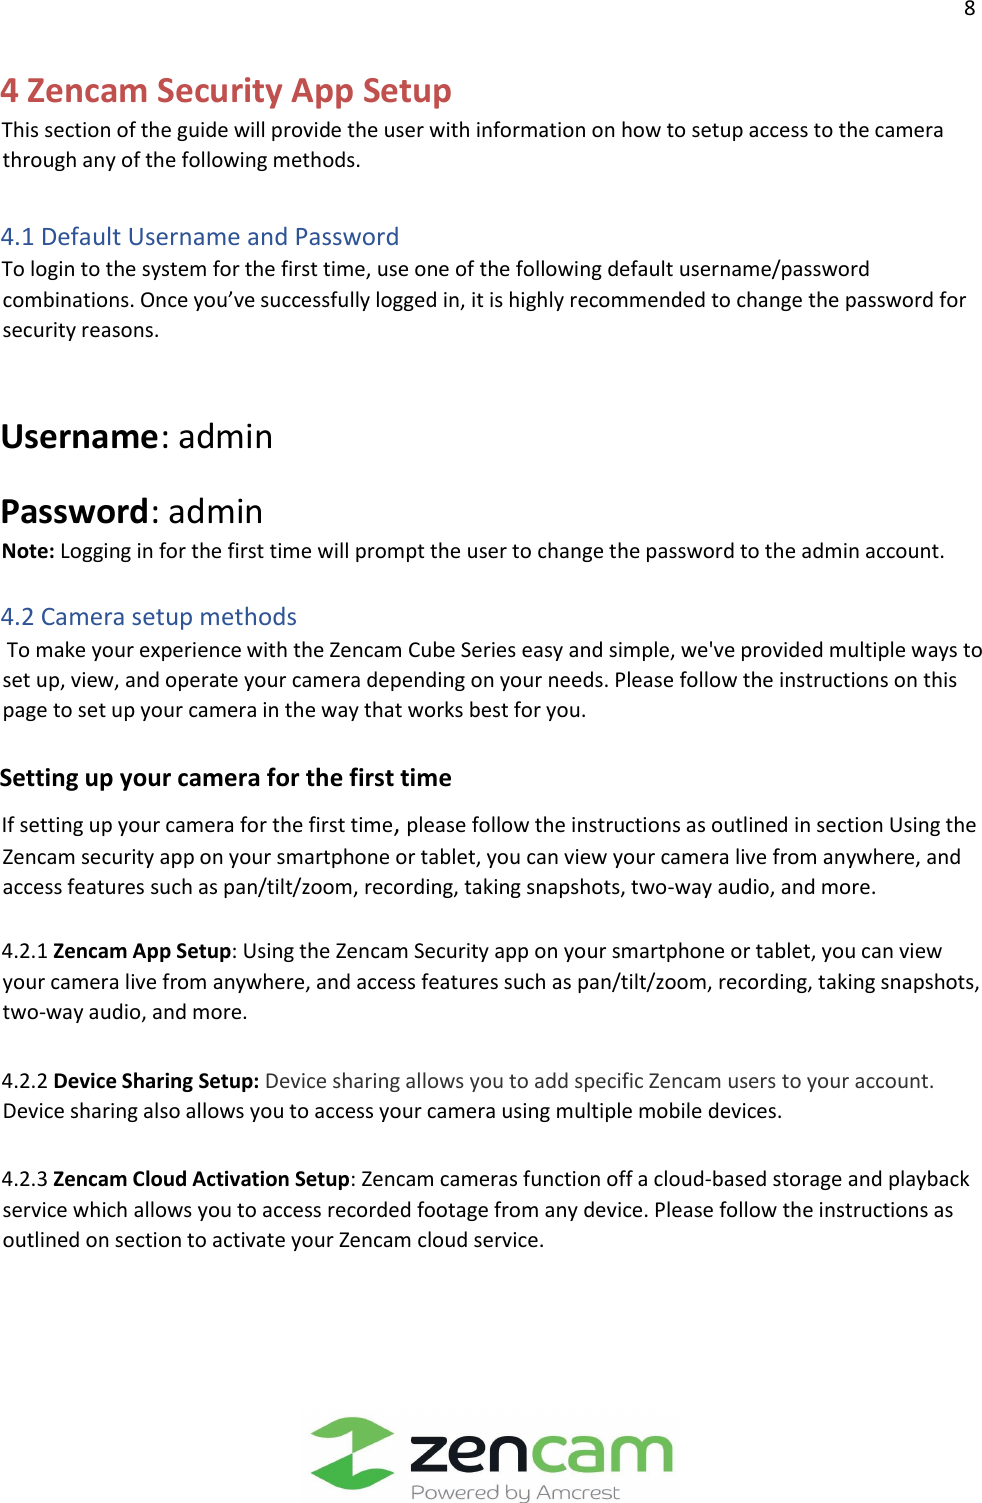                  8                                                                                                                    4 Zencam Security App Setup    This section of the guide will provide the user with information on how to setup access to the camera through any of the following methods.    4.1 Default Username and Password    To login to the system for the first time, use one of the following default username/password combinations. Once you’ve successfully logged in, it is highly recommended to change the password for security reasons.    Username: admin     Password: admin    Note: Logging in for the first time will prompt the user to change the password to the admin account.    4.2 Camera setup methods     To make your experience with the Zencam Cube Series easy and simple, we&apos;ve provided multiple ways to set up, view, and operate your camera depending on your needs. Please follow the instructions on this page to set up your camera in the way that works best for you.       Setting up your camera for the first time    If setting up your camera for the first time, please follow the instructions as outlined in section Using the Zencam security app on your smartphone or tablet, you can view your camera live from anywhere, and access features such as pan/tilt/zoom, recording, taking snapshots, two-way audio, and more.      4.2.1 Zencam App Setup: Using the Zencam Security app on your smartphone or tablet, you can view your camera live from anywhere, and access features such as pan/tilt/zoom, recording, taking snapshots, two-way audio, and more.       4.2.2 Device Sharing Setup: Device sharing allows you to add specific Zencam users to your account. Device sharing also allows you to access your camera using multiple mobile devices.       4.2.3 Zencam Cloud Activation Setup: Zencam cameras function off a cloud-based storage and playback service which allows you to access recorded footage from any device. Please follow the instructions as outlined on section to activate your Zencam cloud service.  